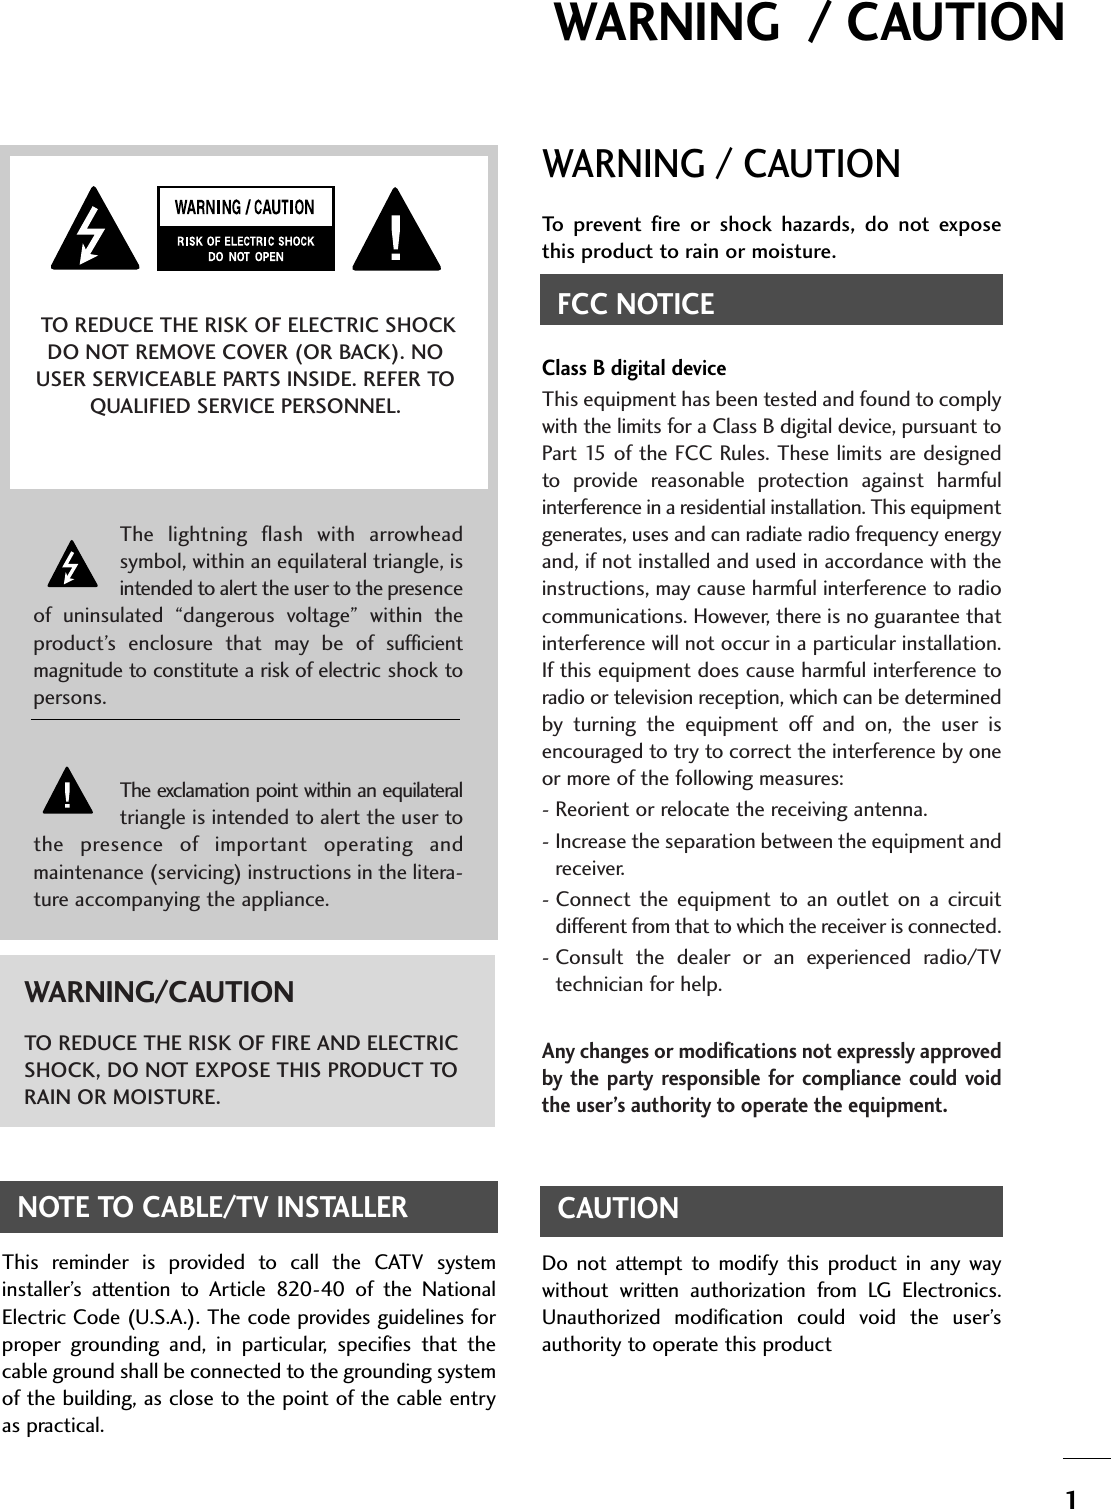 1WARNING  / CAUTIONWARNING / CAUTIONTo  prevent  fire  or  shock  hazards,  do  not  exposethis product to rain or moisture.FCC NOTICEClass B digital deviceThis equipment has been tested and found to complywith the limits for a Class B digital device, pursuant toPart 15 of  the  FCC  Rules. These limits are designedto  provide  reasonable  protection  against  harmfulinterference in a residential installation. This equipmentgenerates, uses and can radiate radio frequency energyand, if not installed and used in accordance with theinstructions, may cause harmful interference to radiocommunications. However, there is no guarantee thatinterference will not occur in a particular installation.If this equipment does cause harmful interference toradio or television reception, which can be determinedby  turning  the  equipment  off  and  on,  the  user  isencouraged to try to correct the interference by oneor more of the following measures:- Reorient or relocate the receiving antenna.- Increase the separation between the equipment andreceiver.- Connect  the  equipment  to  an  outlet  on  a  circuitdifferent from that to which the receiver is connected.- Consult  the  dealer  or  an  experienced  radio/TVtechnician for help.Any changes or modifications not expressly approvedby  the  party responsible  for  compliance  could  voidthe user’s authority to operate the equipment.CAUTIONDo  not  attempt  to  modify  this  product  in  any  waywithout  written  authorization  from  LG  Electronics.Unauthorized  modification  could  void  the  user’sauthority to operate this product The  lightning  flash  with  arrowheadsymbol, within an equilateral triangle, isintended to alert the user to the presenceof  uninsulated  “dangerous  voltage”  within  theproduct’s  enclosure  that  may  be  of  sufficientmagnitude to constitute a risk of electric shock topersons.The exclamation point within an equilateraltriangle is intended to alert the user tothe  presence  of  important  operating  andmaintenance (servicing) instructions in the litera-ture accompanying the appliance.TO REDUCE THE RISK OF ELECTRIC SHOCKDO NOT REMOVE COVER (OR BACK). NOUSER SERVICEABLE PARTS INSIDE. REFER TOQUALIFIED SERVICE PERSONNEL.WARNING/CAUTIONTO REDUCE THE RISK OF FIRE AND ELECTRICSHOCK, DO NOT EXPOSE THIS PRODUCT TORAIN OR MOISTURE.NOTE TO CABLE/TV INSTALLERThis  reminder  is  provided  to  call  the  CATV  systeminstaller’s  attention  to  Article  820-40  of  the  NationalElectric Code (U.S.A.). The code provides guidelines forproper  grounding  and,  in  particular,  specifies  that  thecable ground shall be connected to the grounding systemof the building, as close to the point of the cable entryas practical.